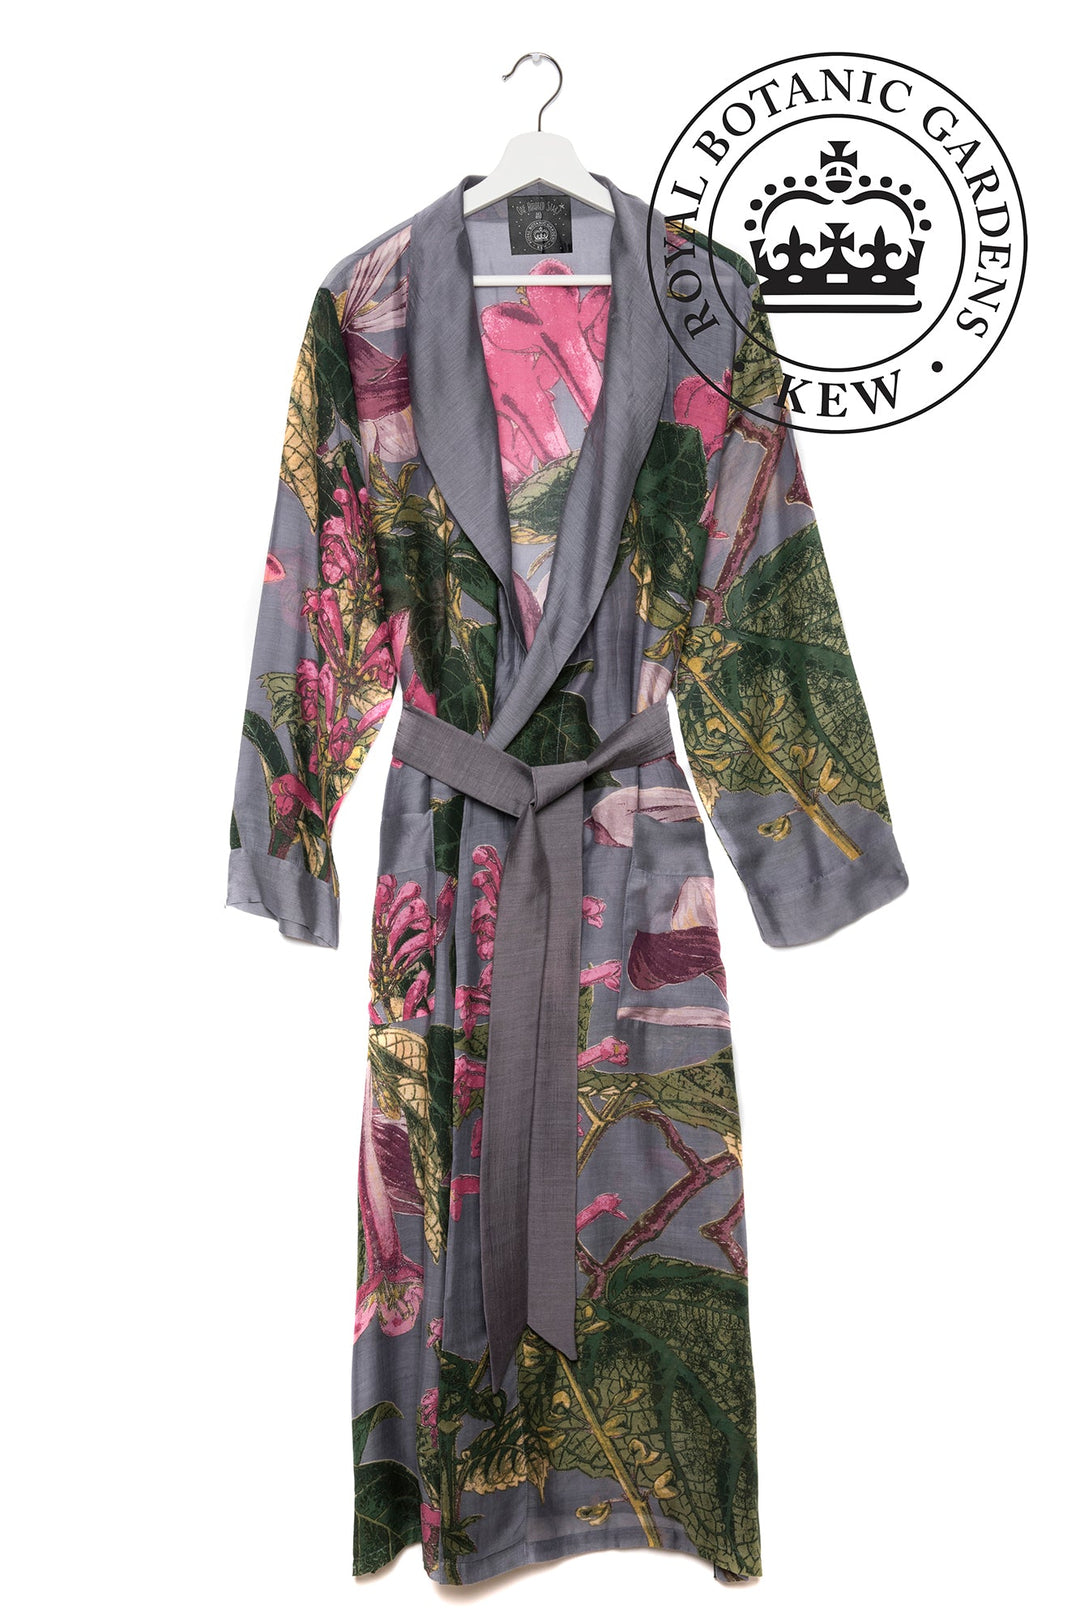 KEW Magnolia Grey Gown- This gown is perfect as a luxurious house coat or for layering as a chic accessory to your favourite outfit.